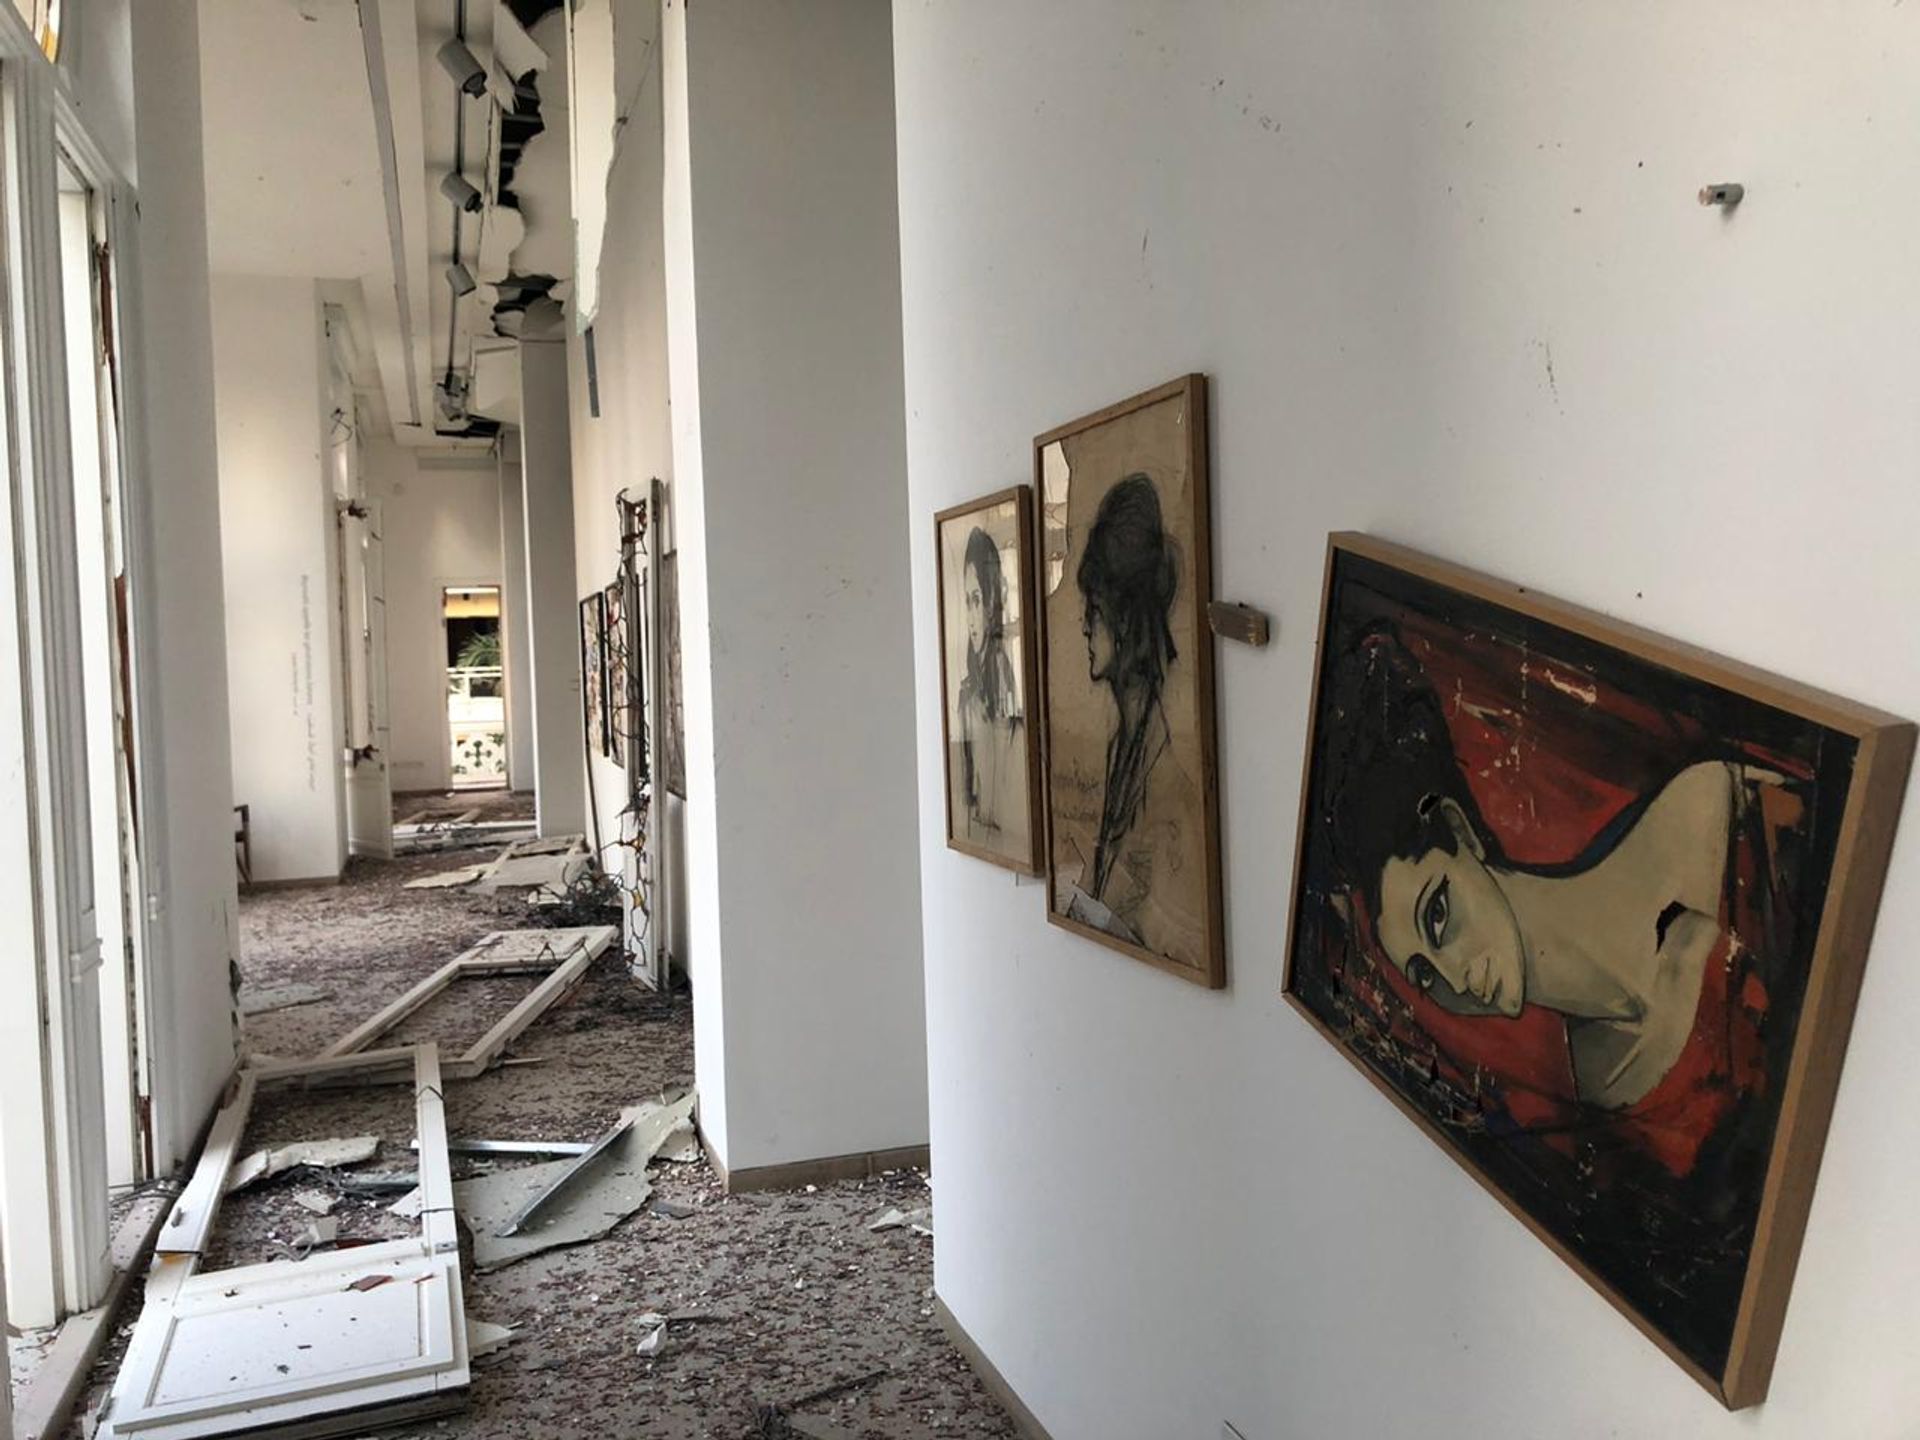 Beirut's Sursock museum suffered extensive damage from the explosion Photo: Marie Nour Hechaime, curator at Sursock Museum